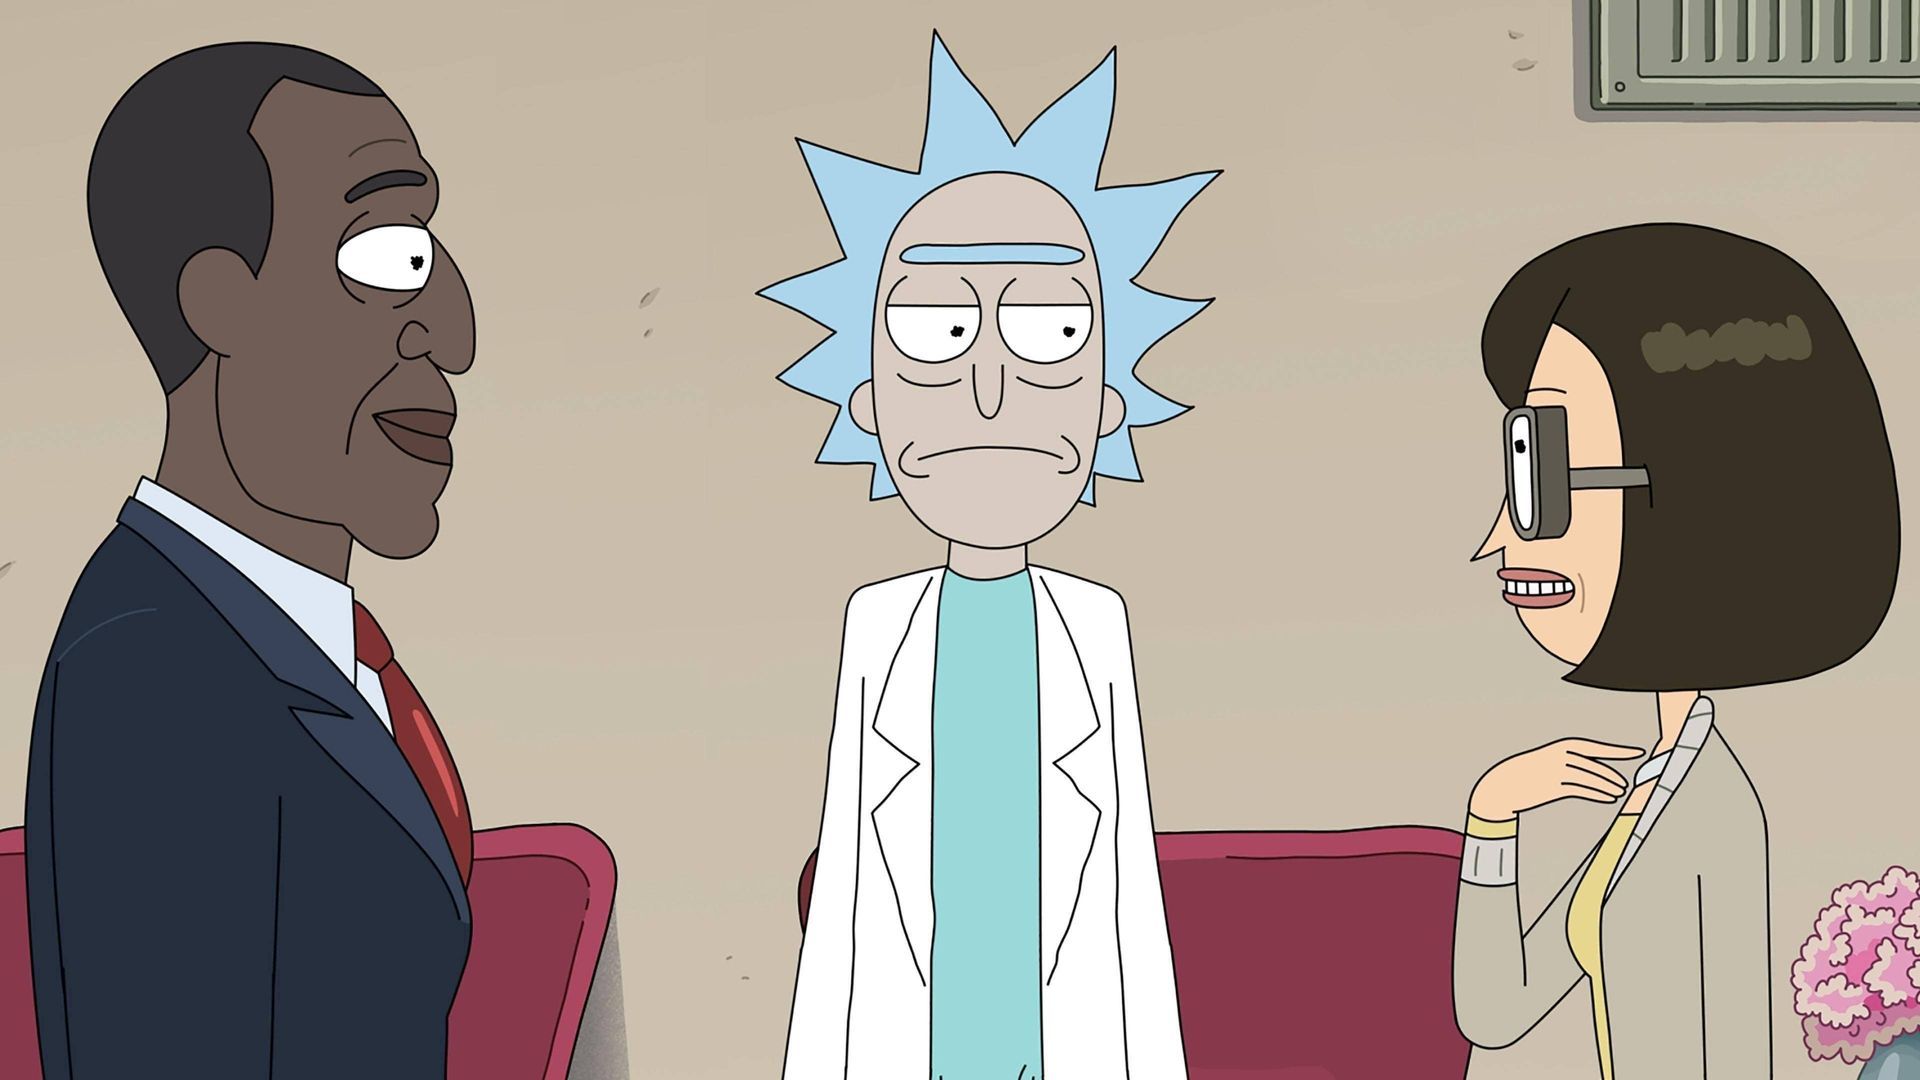 Rick and Morty Season 7 Episode 3 Streaming: How to Watch & Stream Online